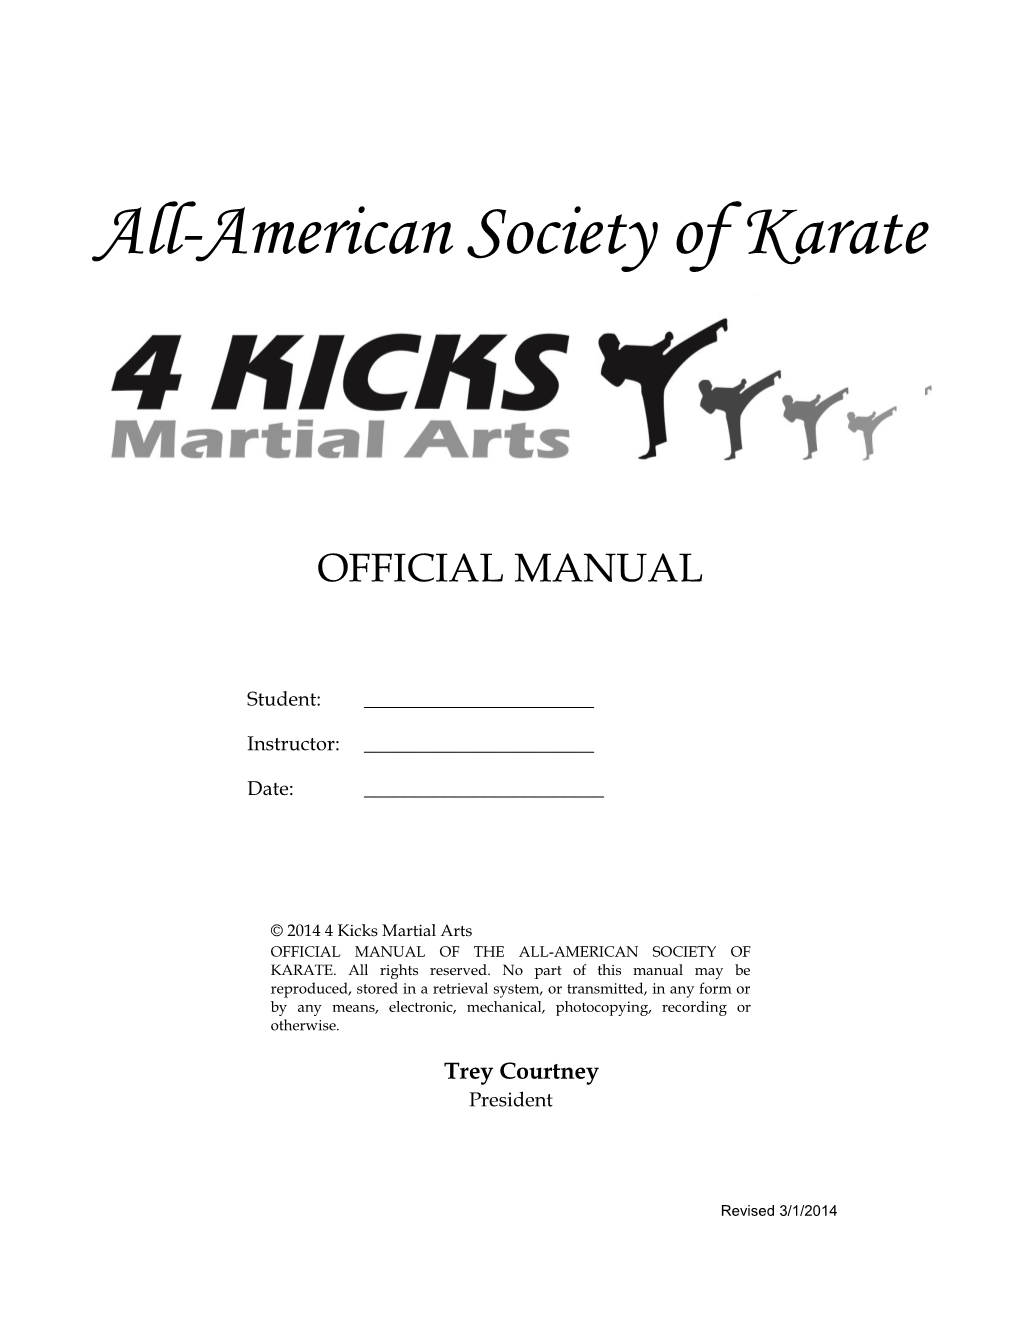 All-American Society of Karate